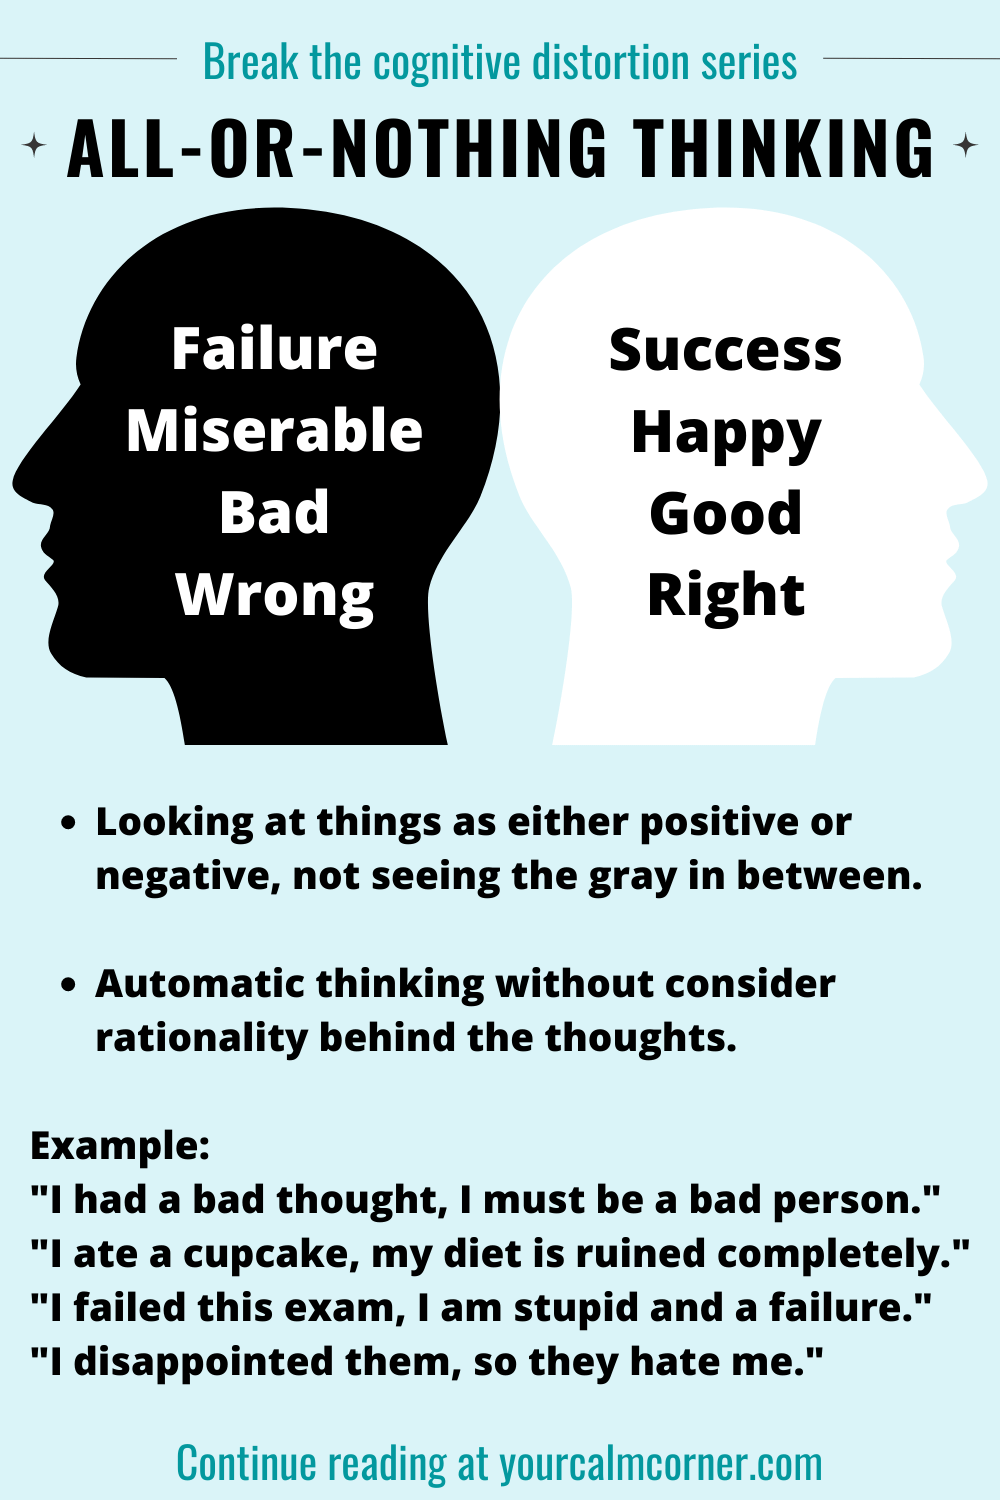 infographic on all-or-nothing thinking